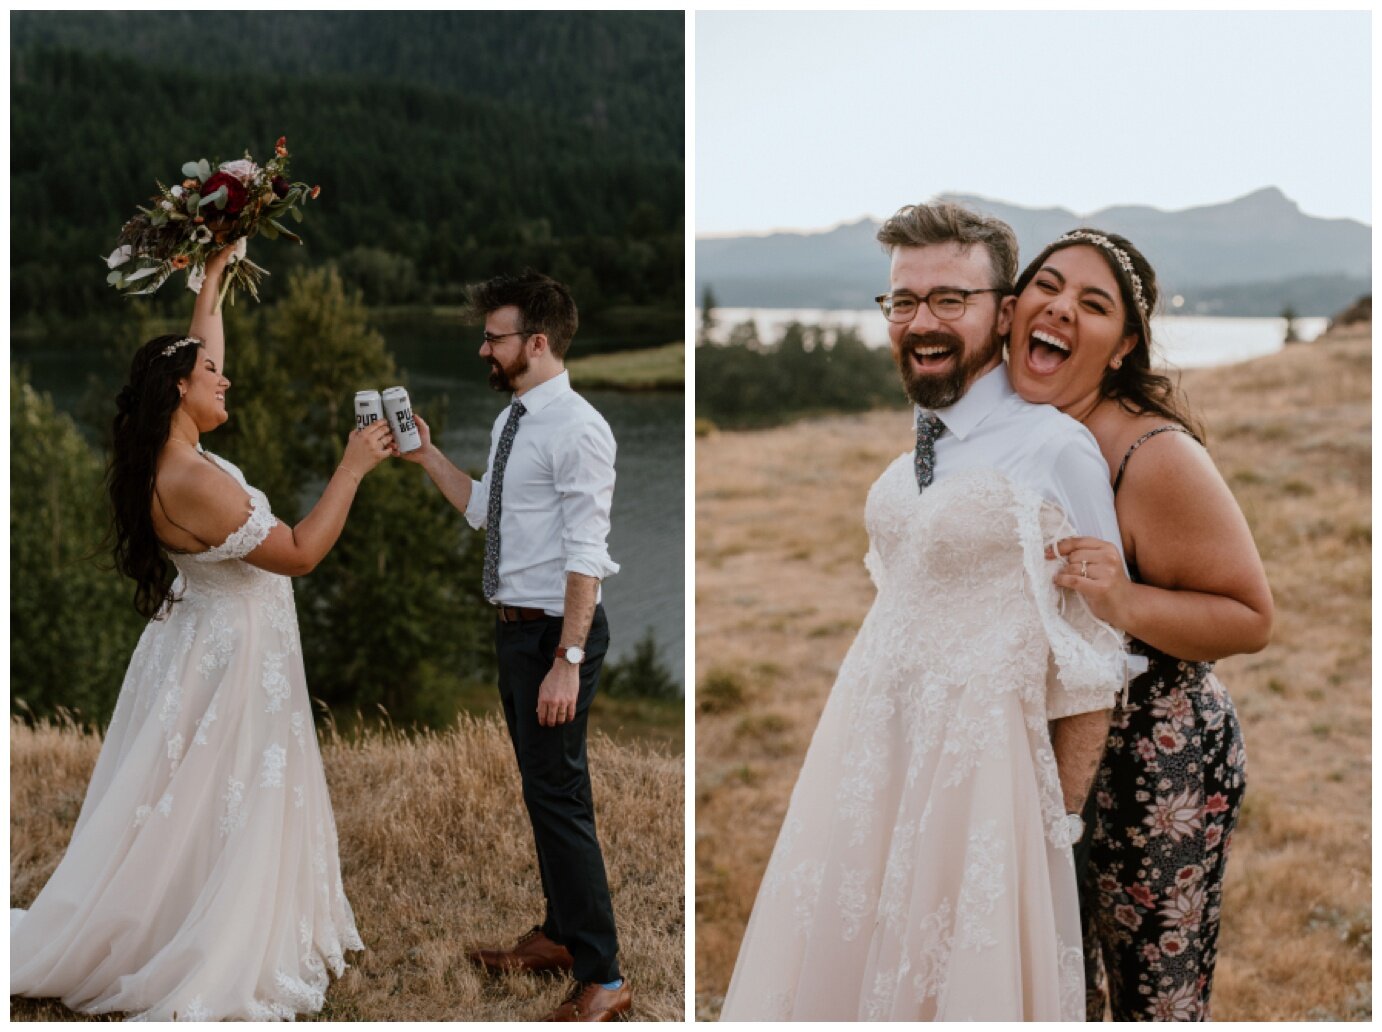 Elopement at Government Cove Peninsula - Madeline Rose Photography - PNW Elopement Photographer_0031.jpg